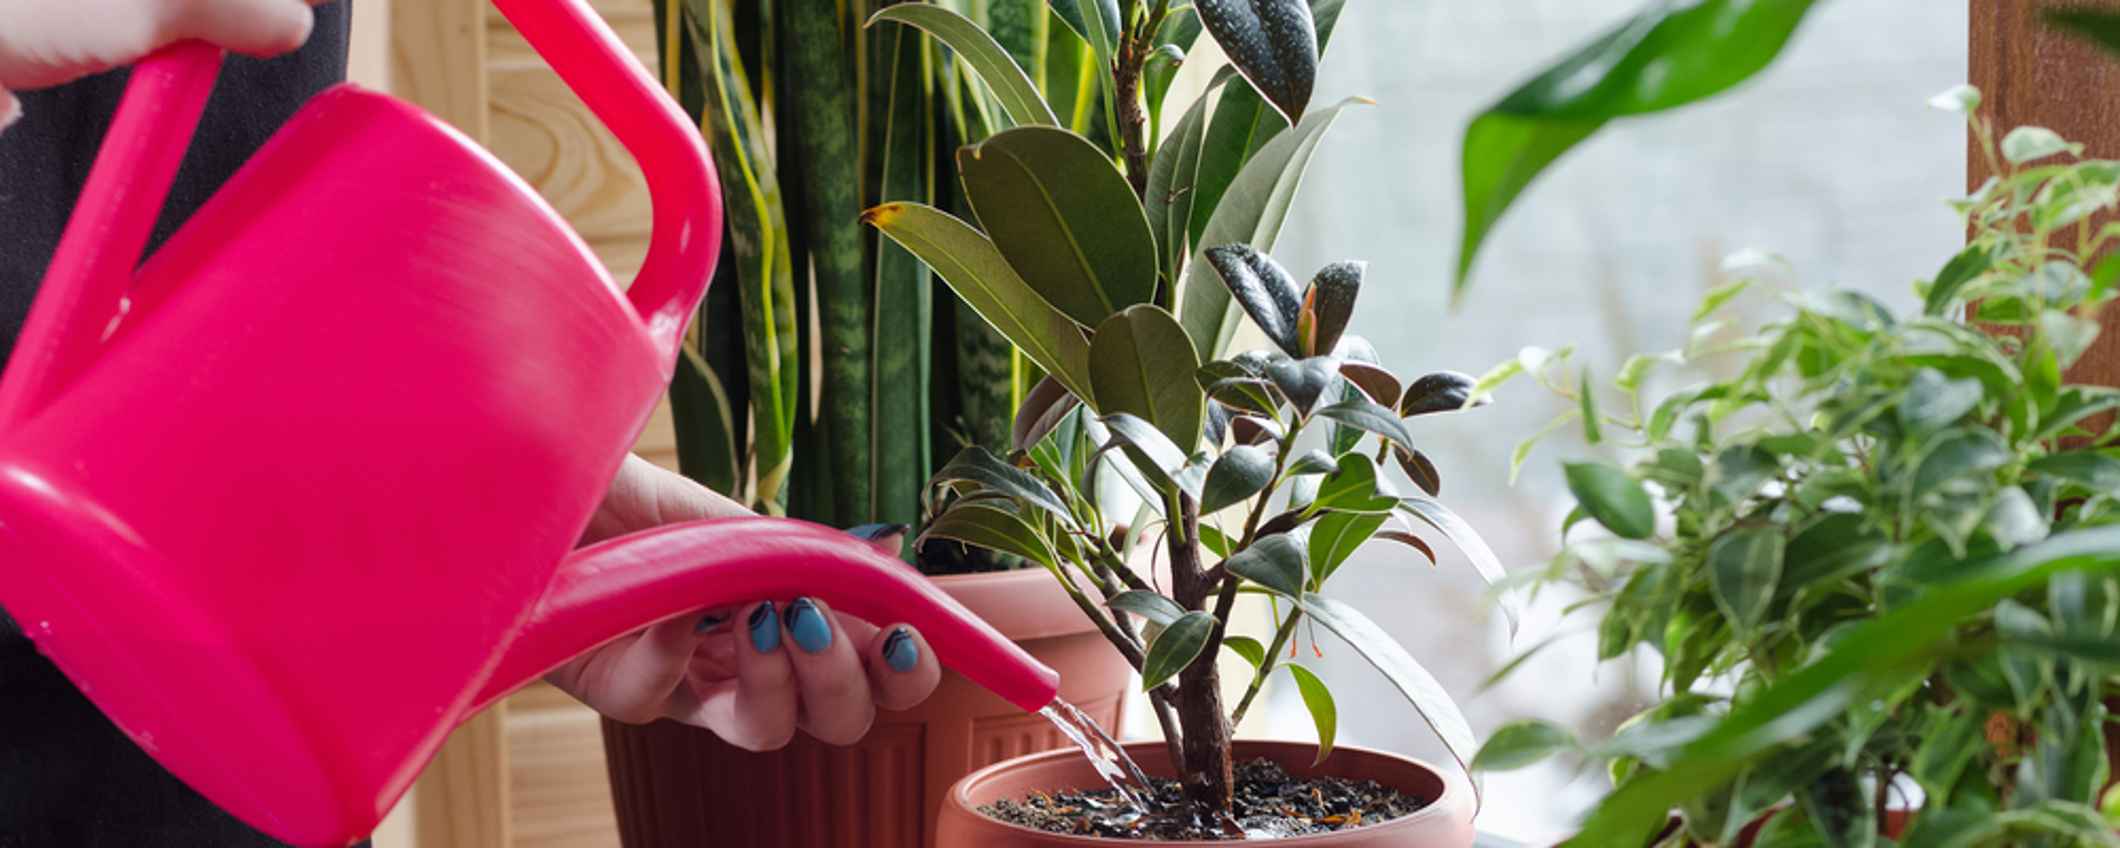 Young woman watering plant using colour plastic watering can